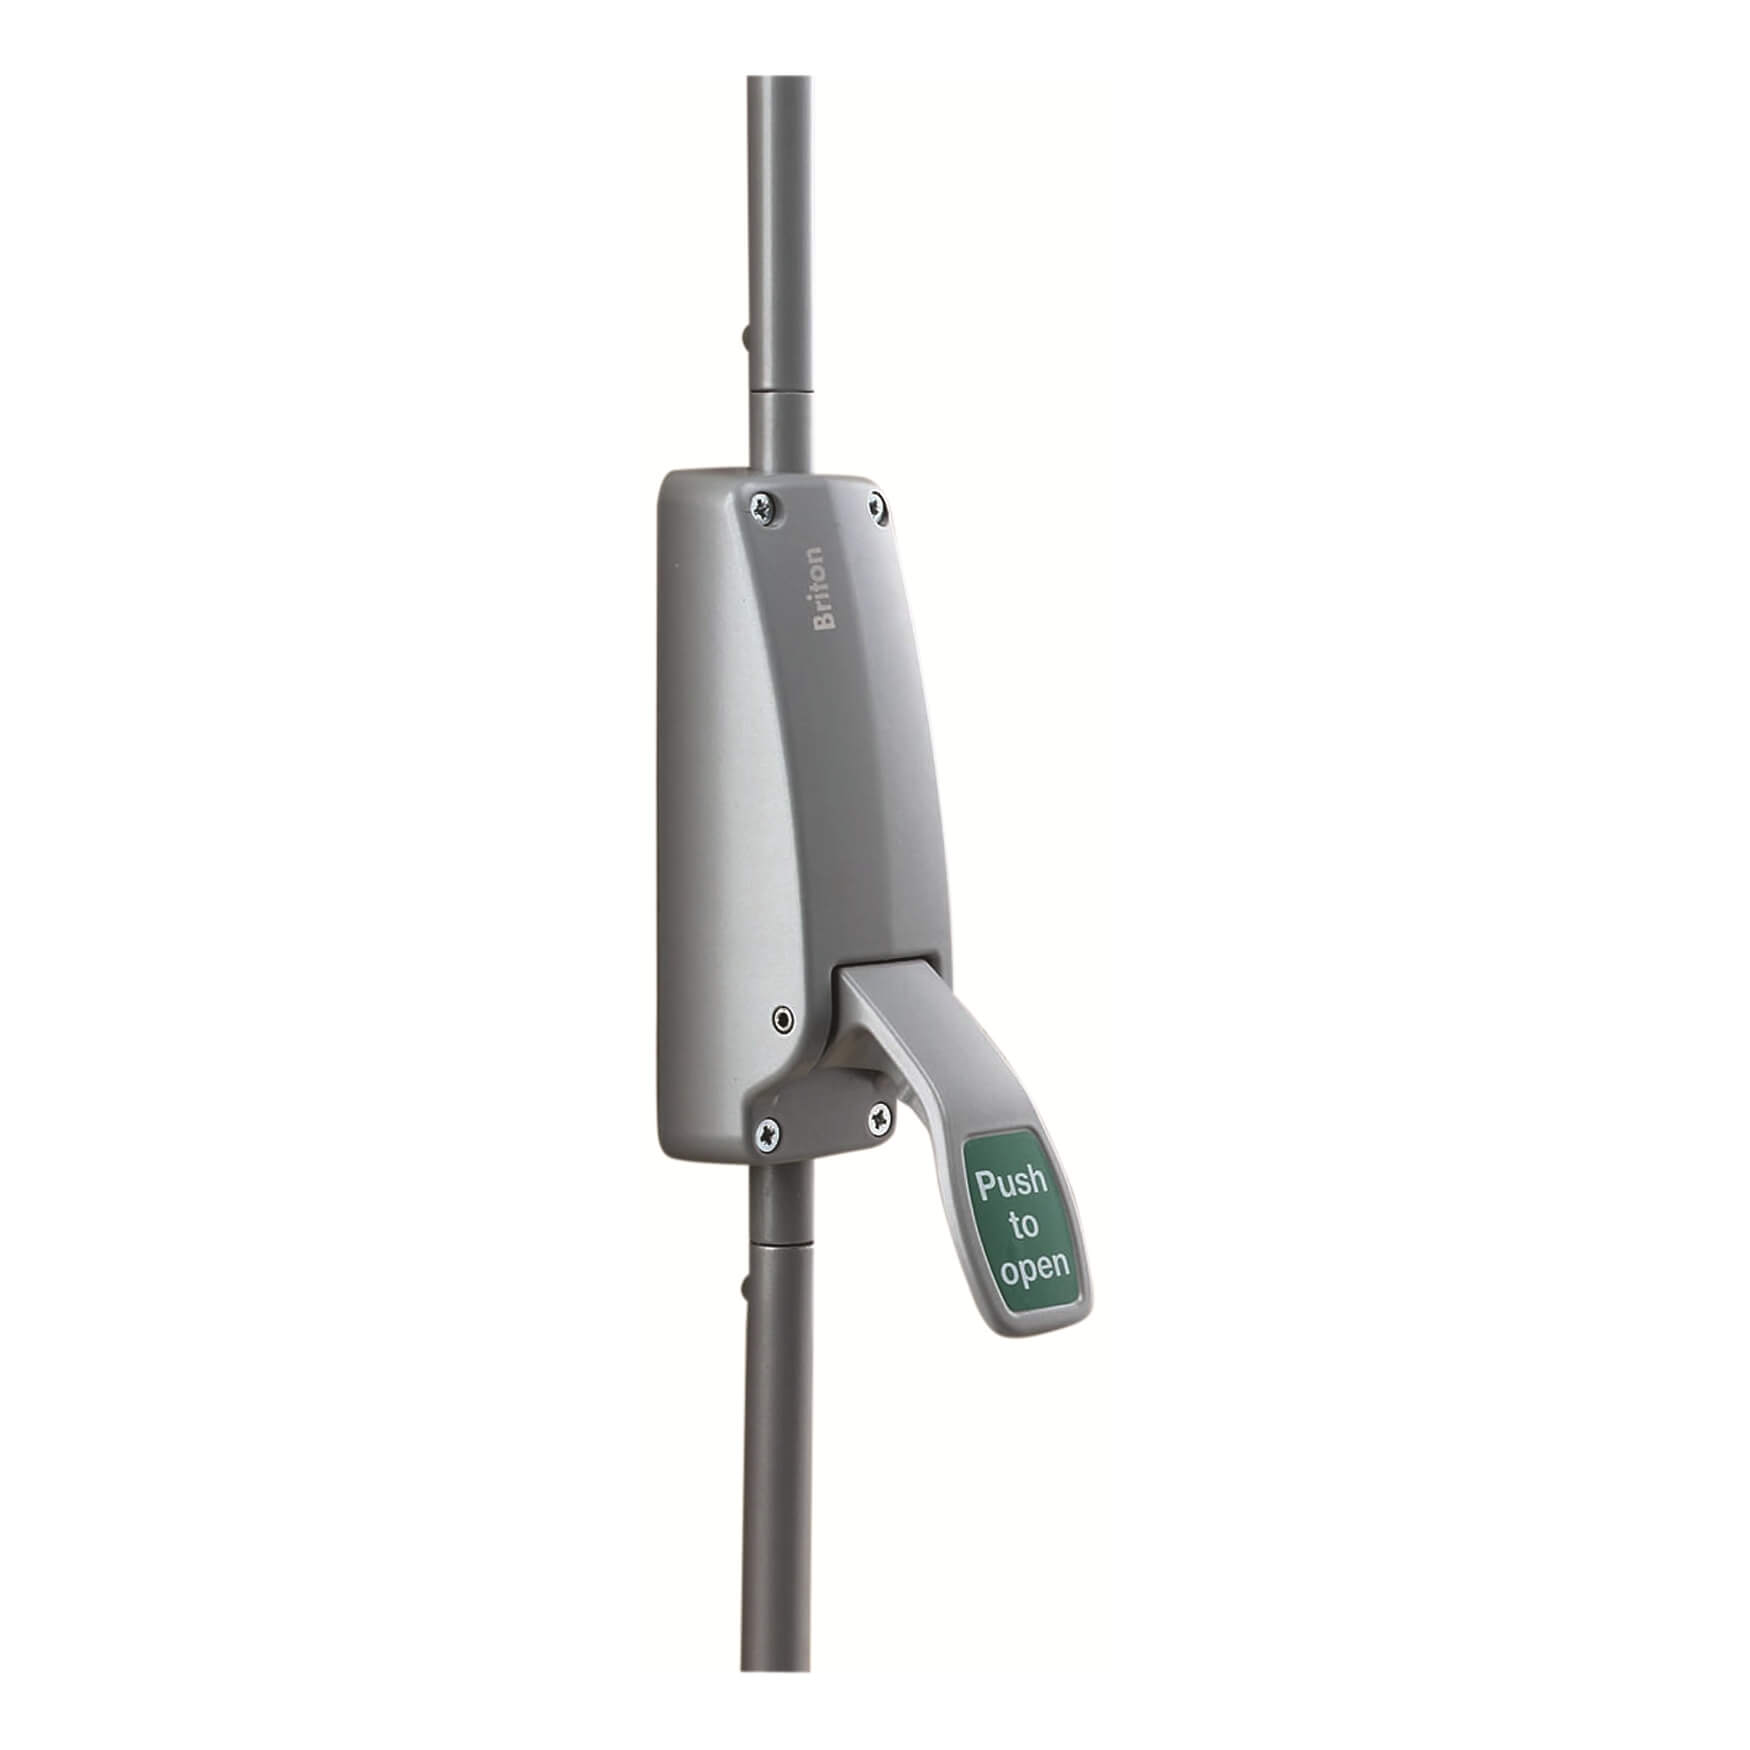 Briton 372 Two Point EN179 Push Pad and Vertical Bolts - For Wooden or Metal Emergency Exit Doors